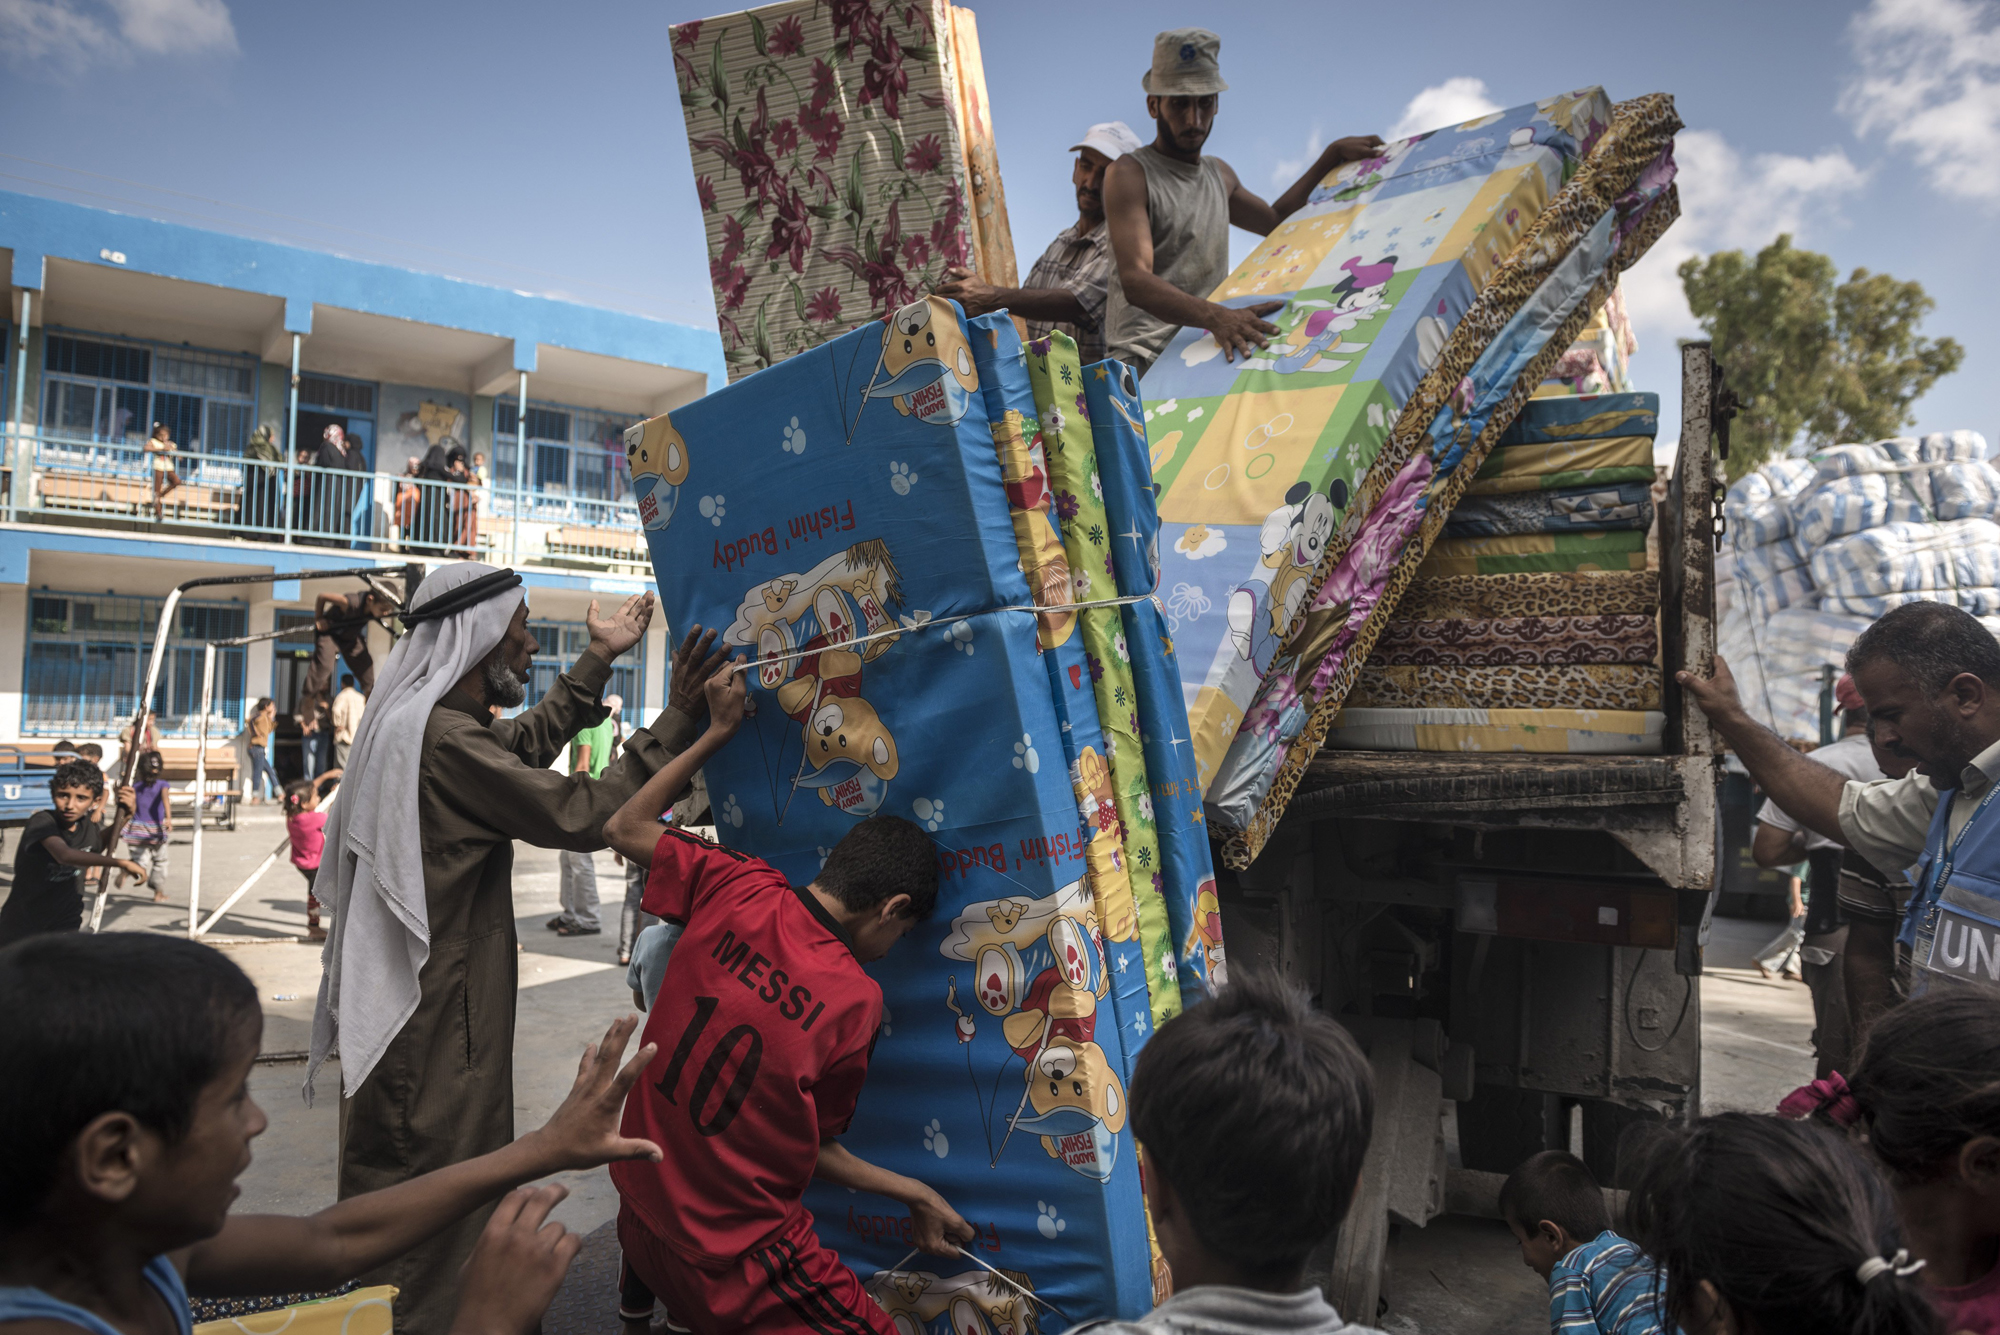 Palestinian refugees unload mattresses at a United Nations shelter in Rafah, Gaza Strip, July 19, 2014.